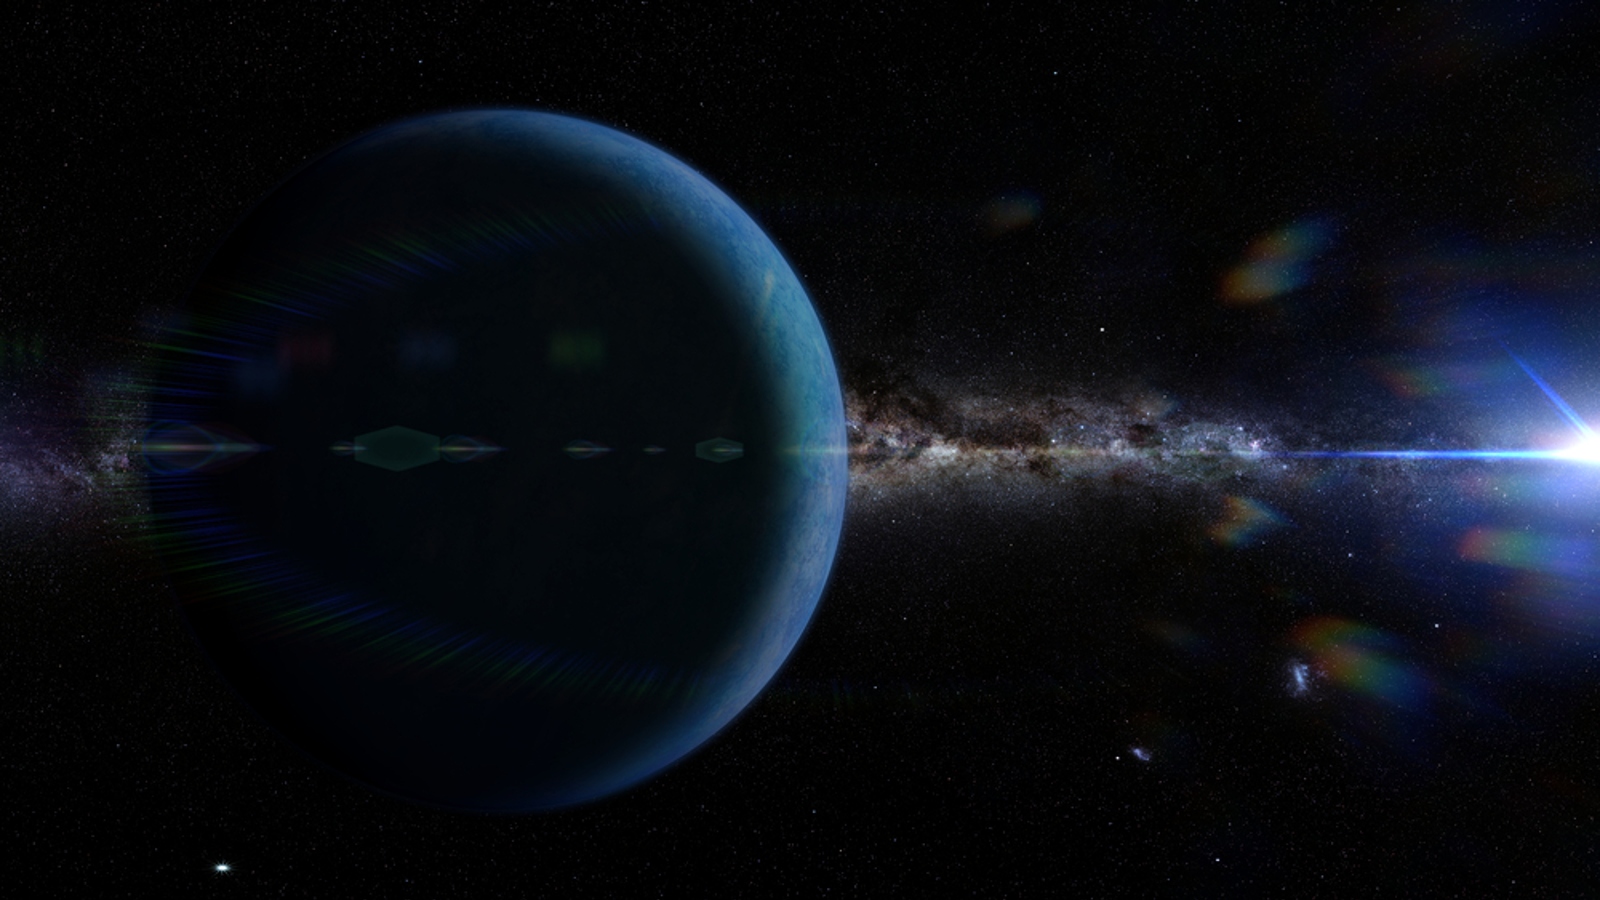 A dark planet with a distant star